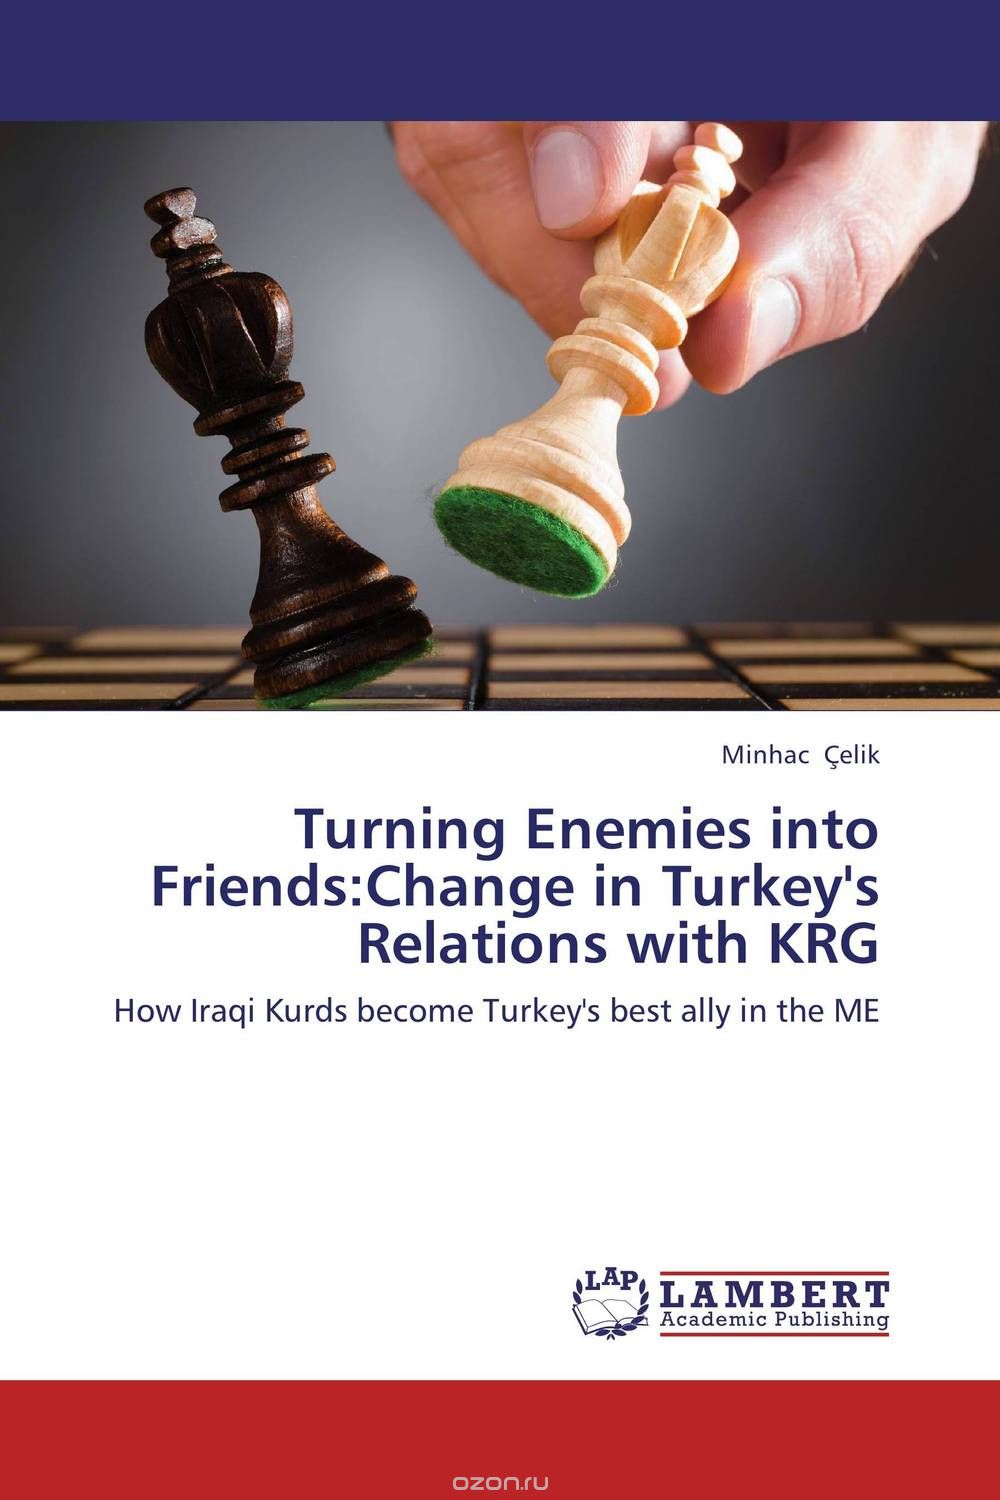 Turning Enemies into Friends:Change in Turkey's Relations with KRG